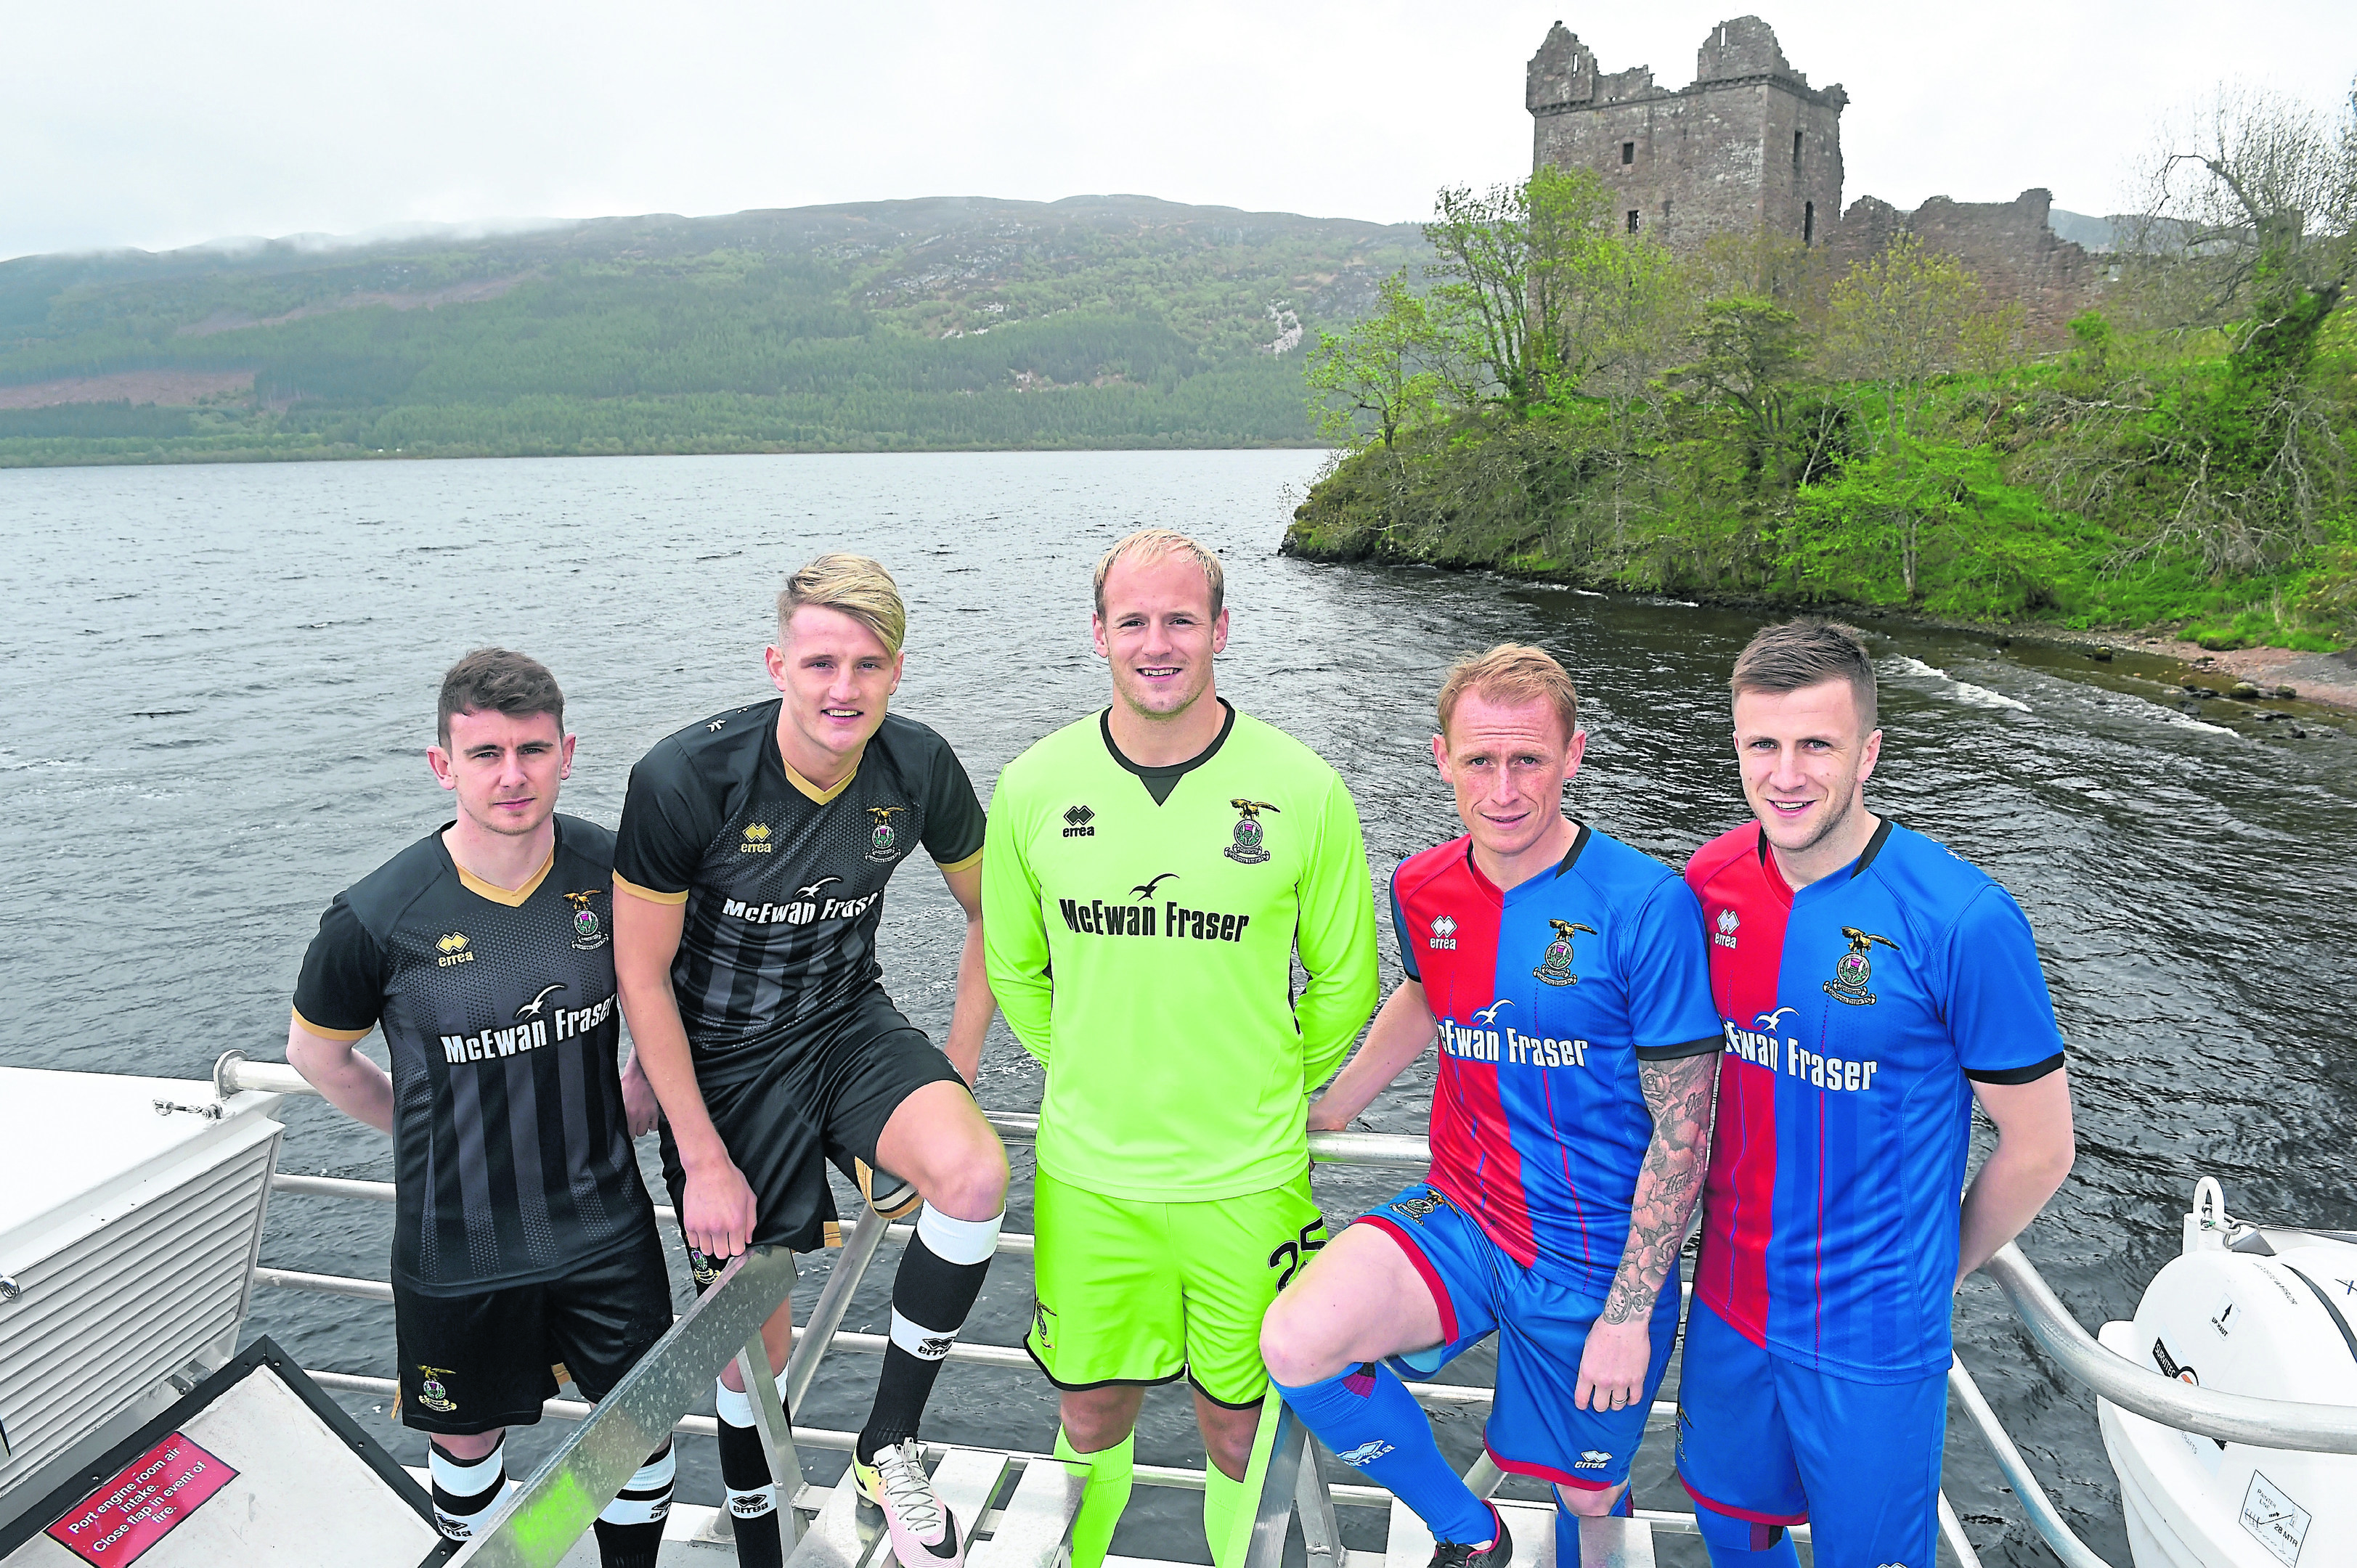 Inverness Caley Thistle launch their new strip.